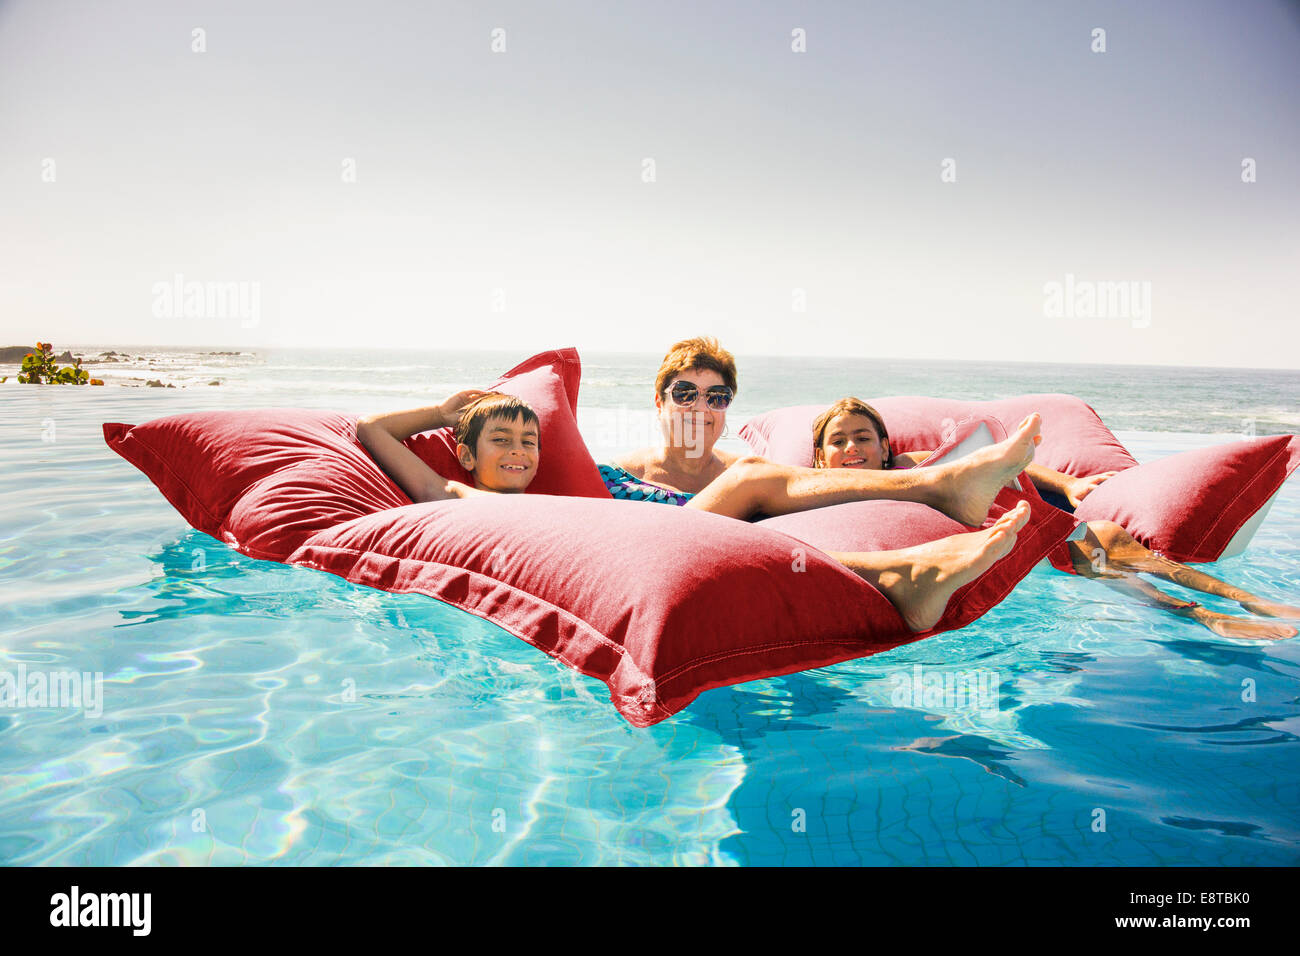 Grandmother and grandchildren relaxing on pool raft Stock Photo